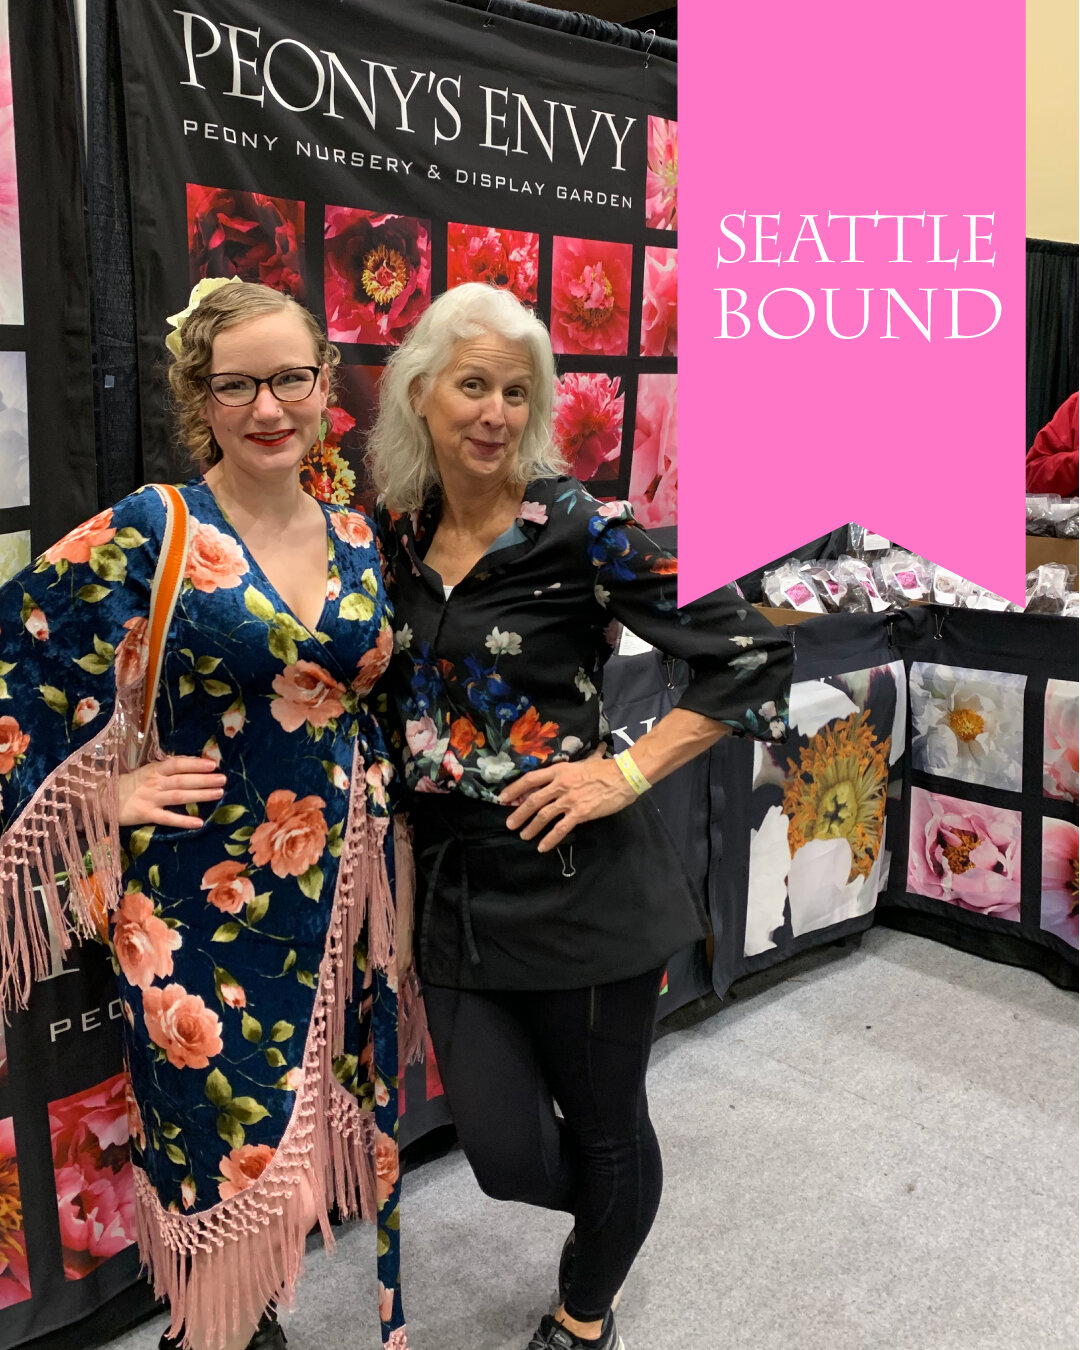 We are on our way to Seattle! Peony's Envy is so happy to be able to return to the Northwest Flower &amp; Garden Show, one of the best flower shows in the country. February 14-18. Visit Peony's Envy in Boot 601. We have a HUGE selection of Tree, Herb